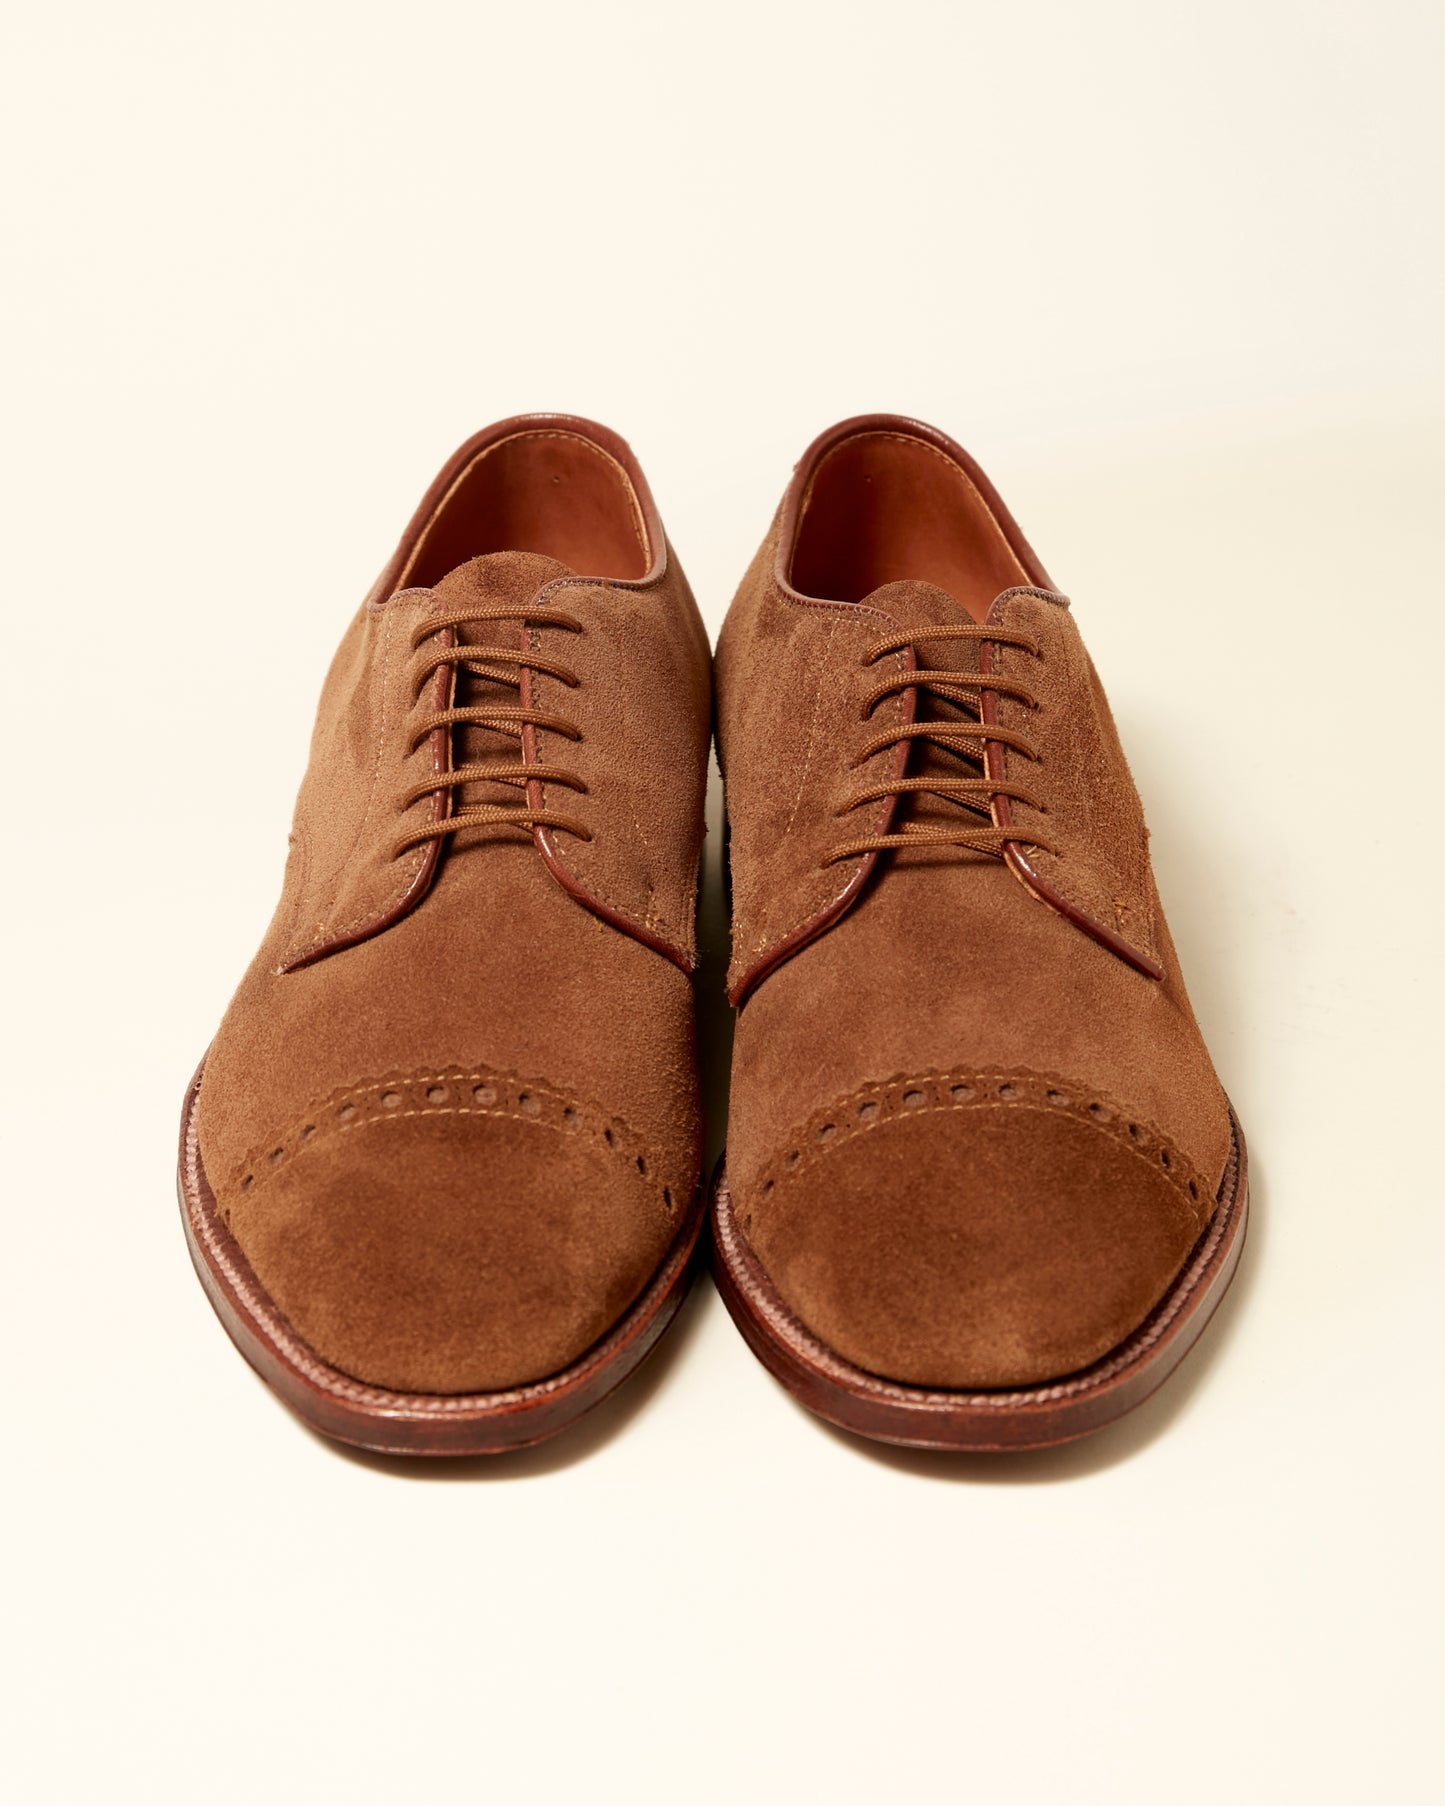 "Ambassador" Unlined Perforated Tip Blucher in Snuff Suede, Plaza Last